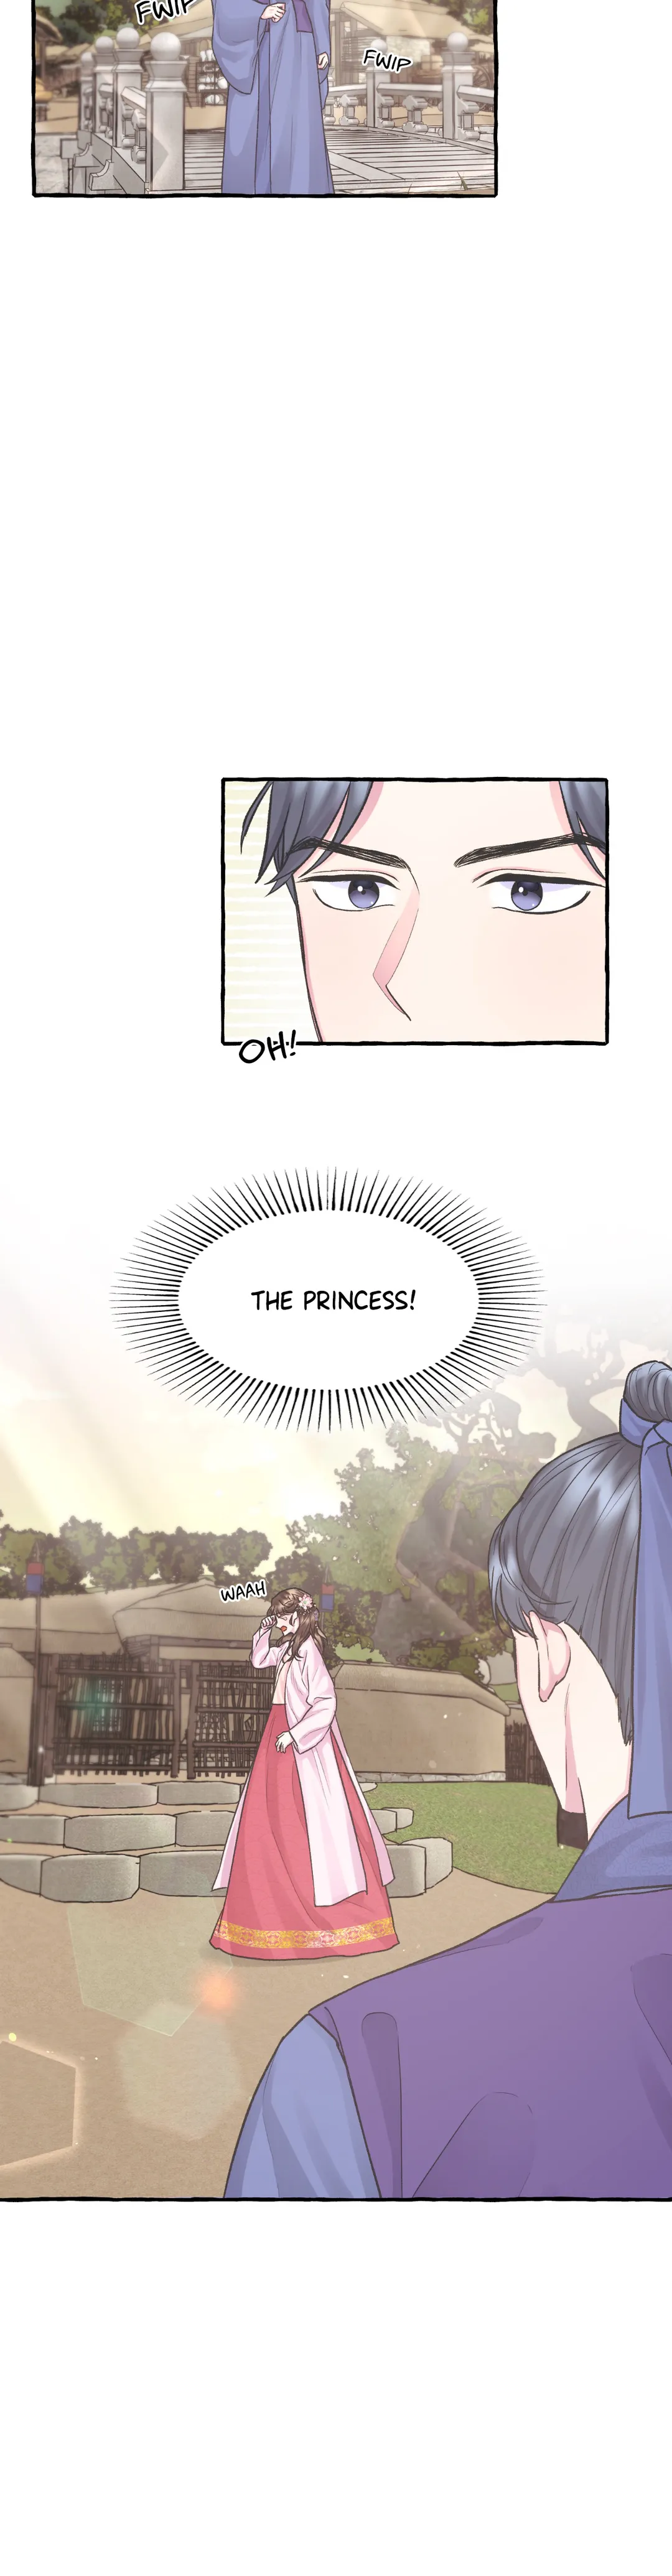 Cheer Up, Your Highness! chapter 3